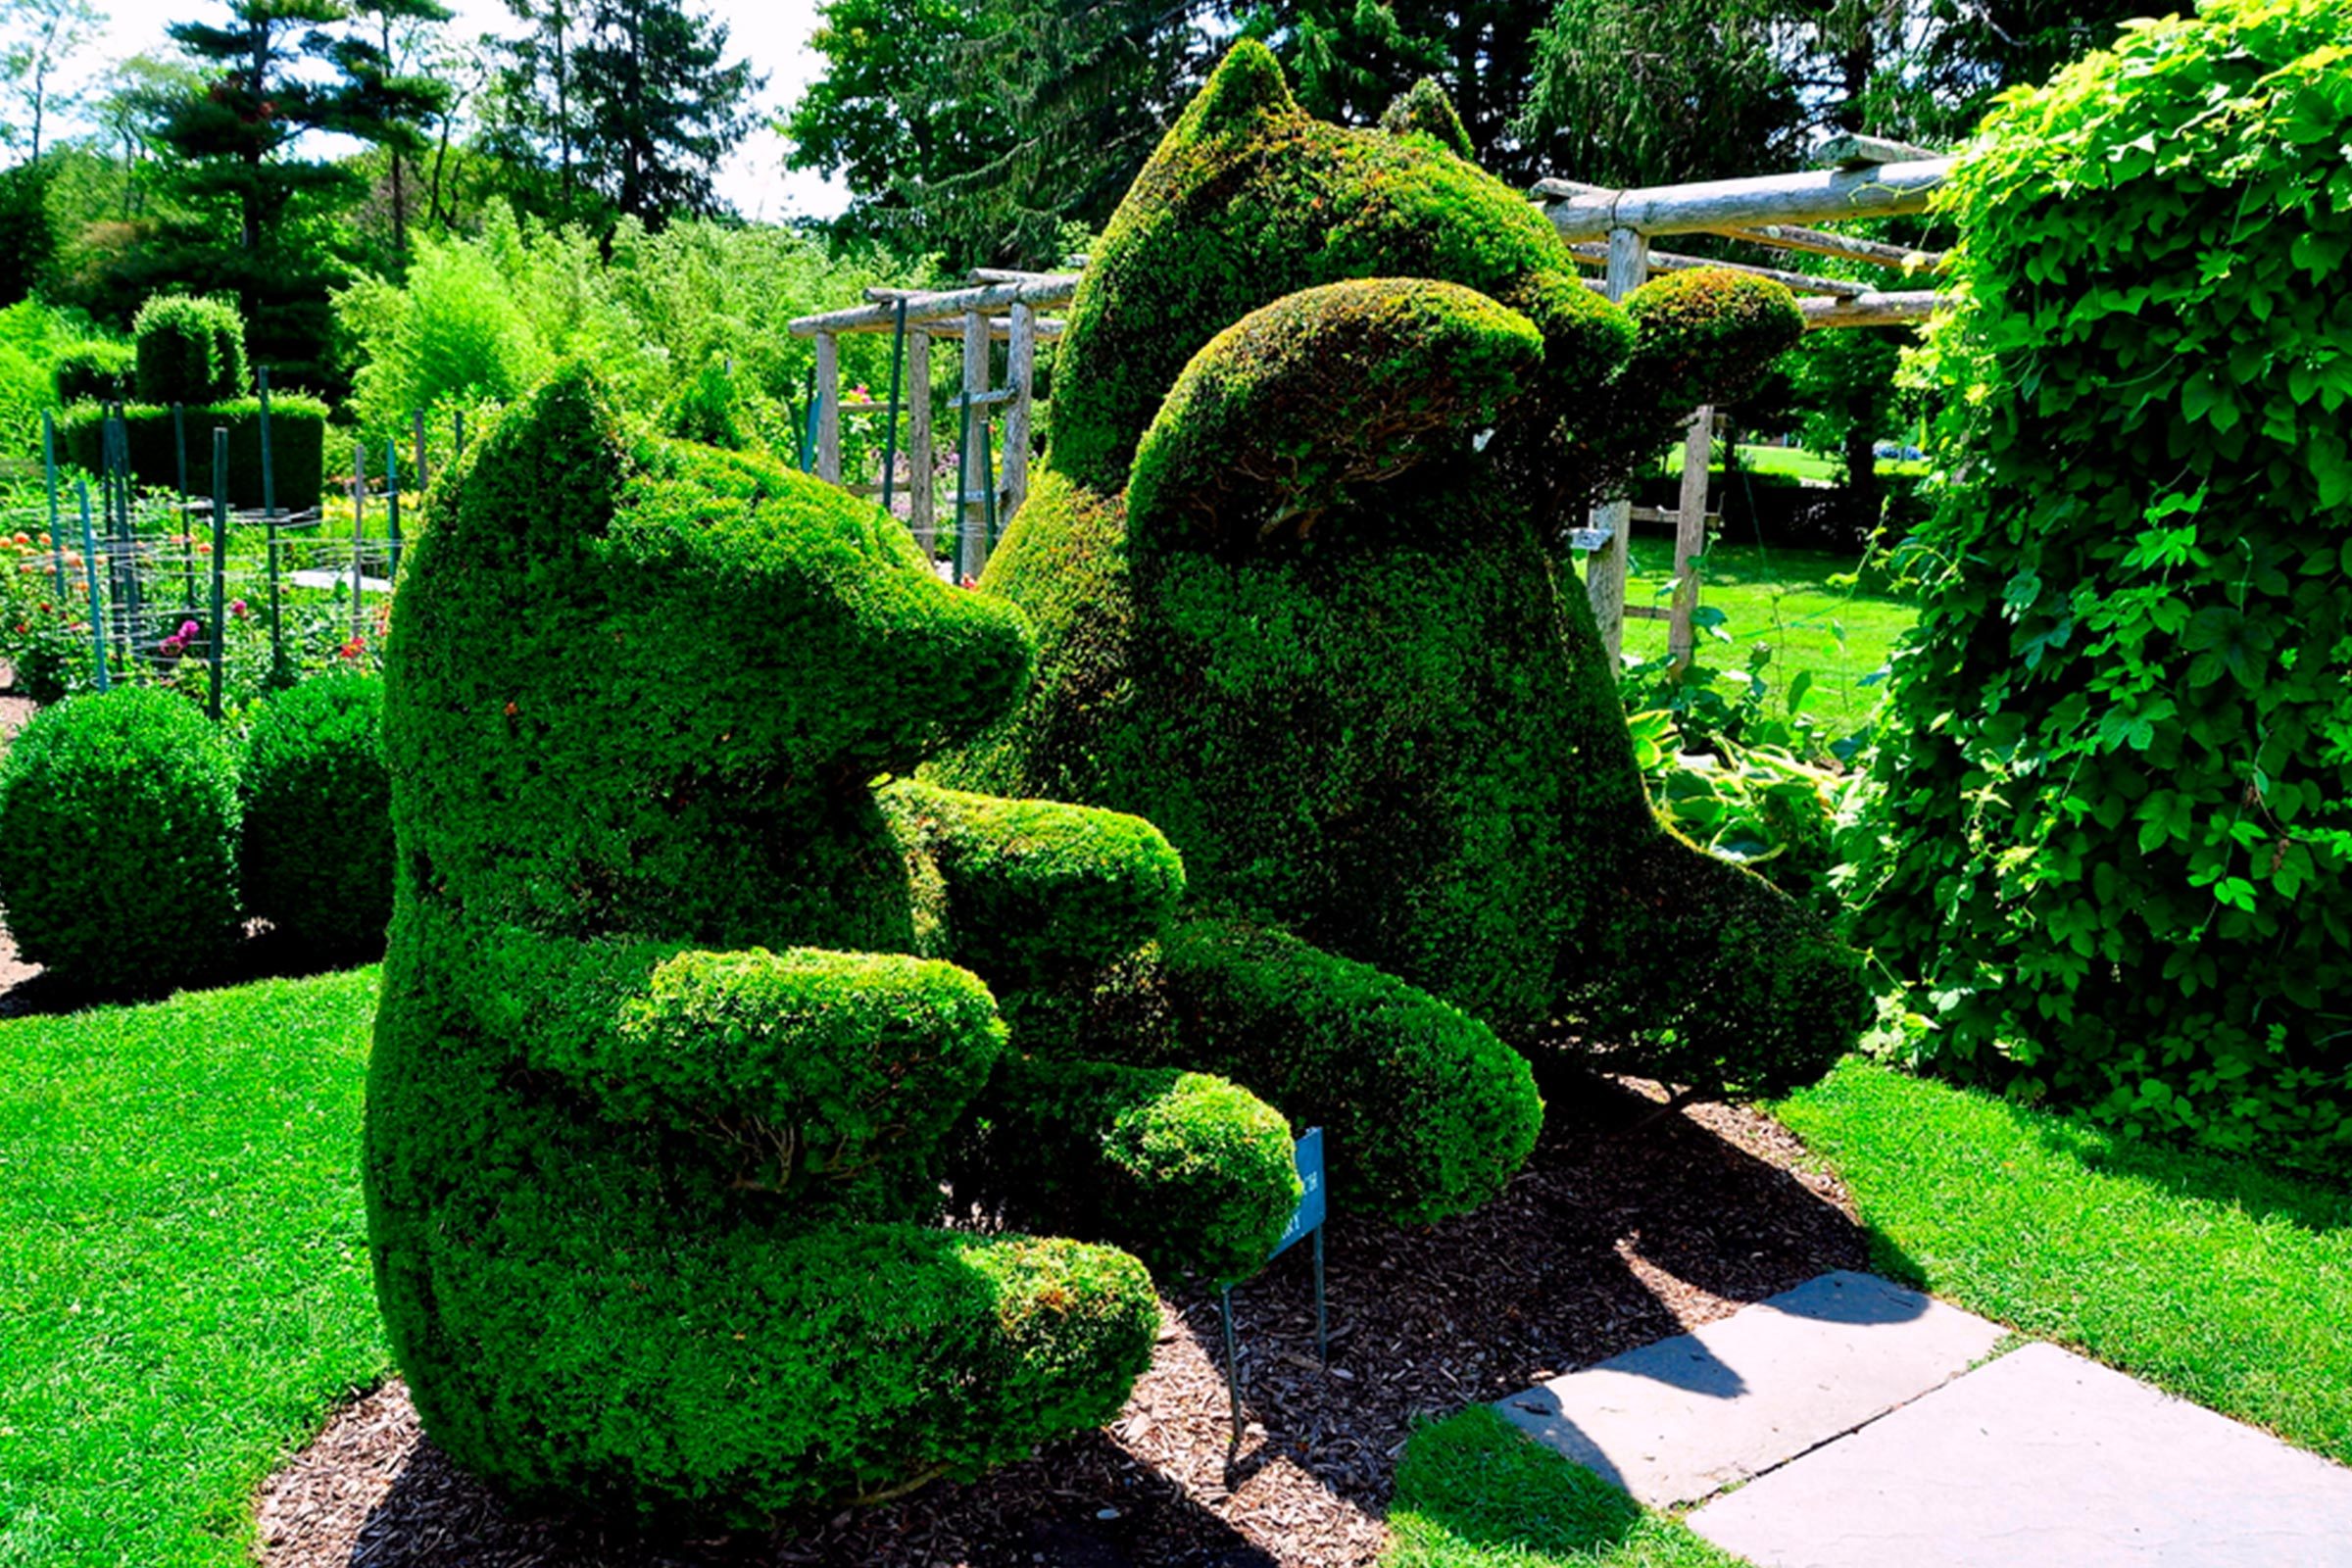 <p>All the animals in this seven-acre park are carved out of trees. The <a href="https://www.tripadvisor.com/Attraction_Review-g54105-d267888-Reviews-Green_Animals_Topiary_Garden-Portsmouth_Rhode_Island.html" rel="noopener">Green Animals Topiary Garden</a> is the oldest and northernmost topiary garden in the nation, and it's worth a detour if you're visiting the Newport Mansions.</p> <p class="listicle-page__cta-button-shop"><a class="shop-btn" href="https://www.tripadvisor.com/Attraction_Review-g54105-d267888-Reviews-Green_Animals_Topiary_Garden-Portsmouth_Rhode_Island.html">Learn More</a></p>